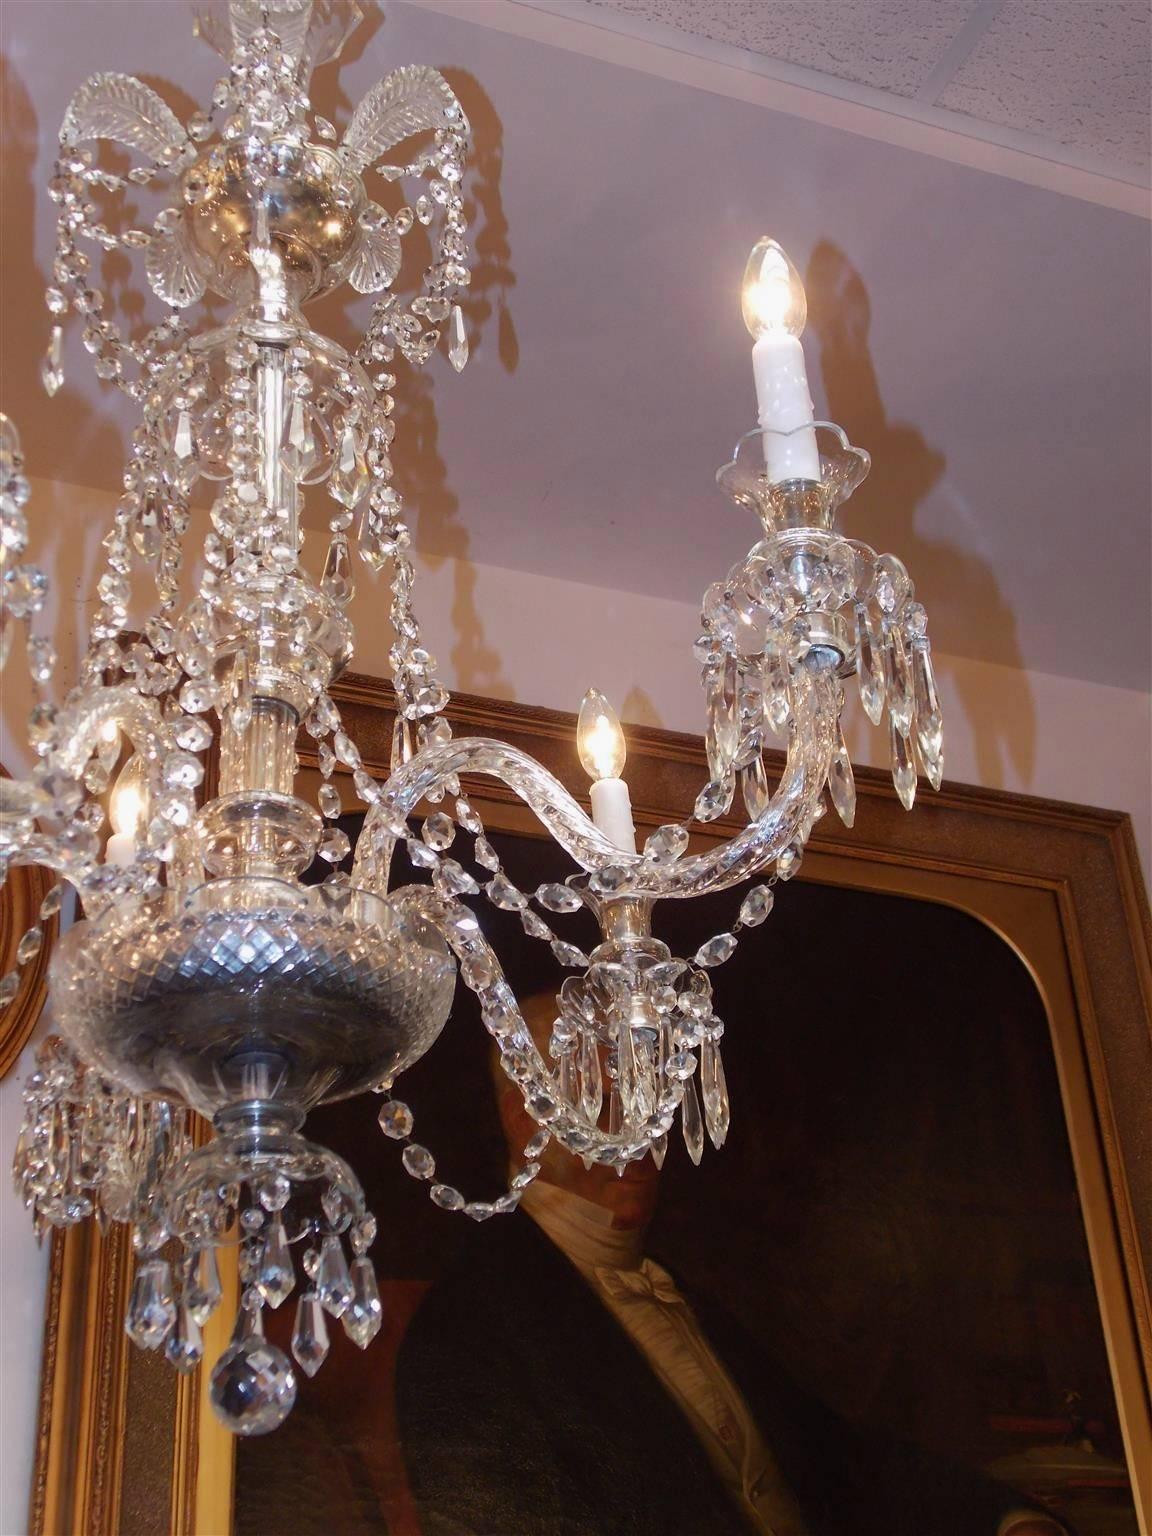 Mid-19th Century Anglo-Irish Cut Crystal Decorative Feather Five-Arm Chandelier, Circa 1840